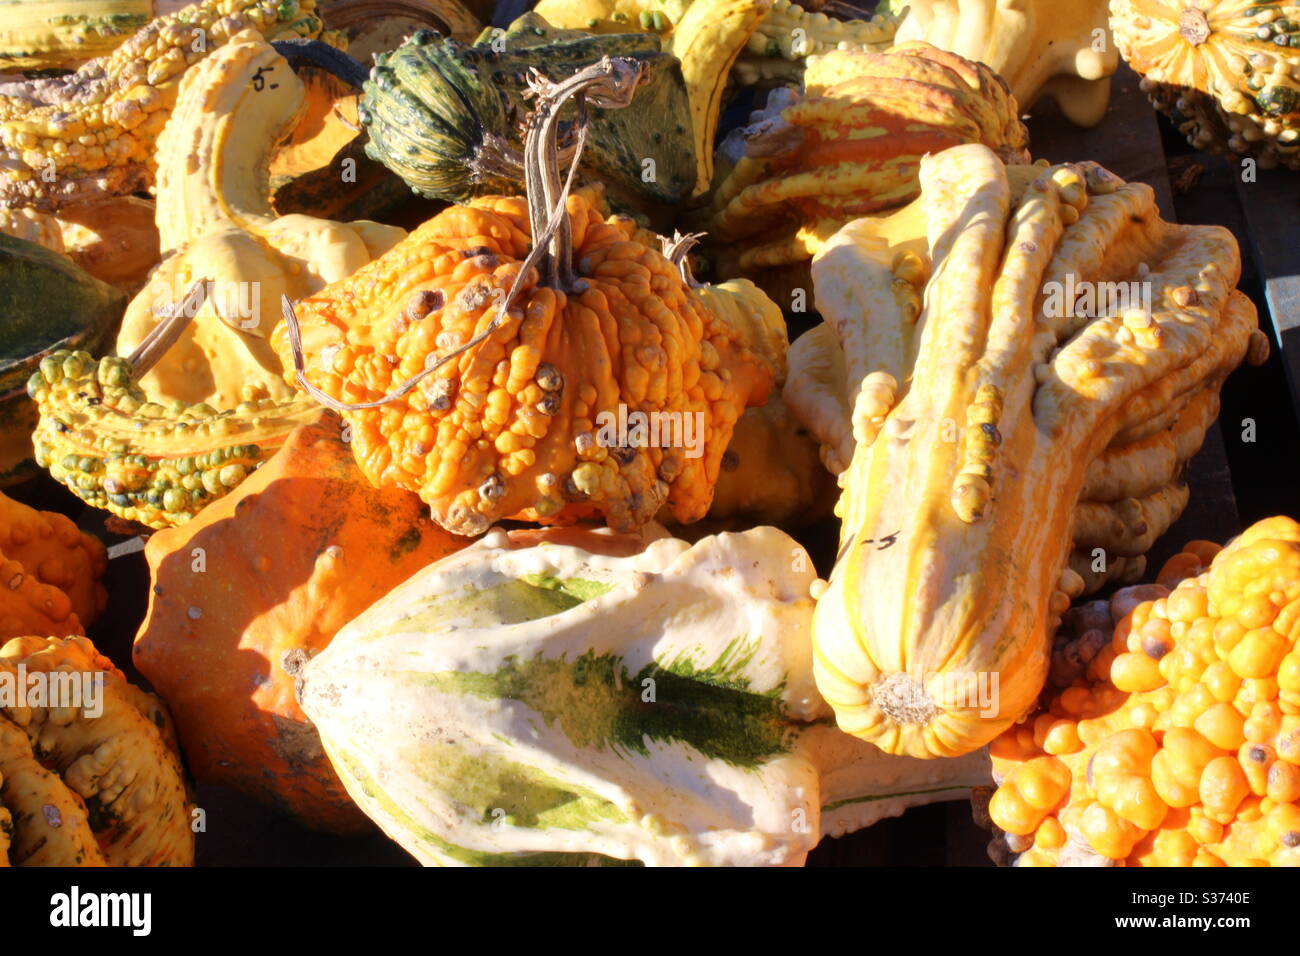 Bumpy gourds and pumpkins Stock Photo